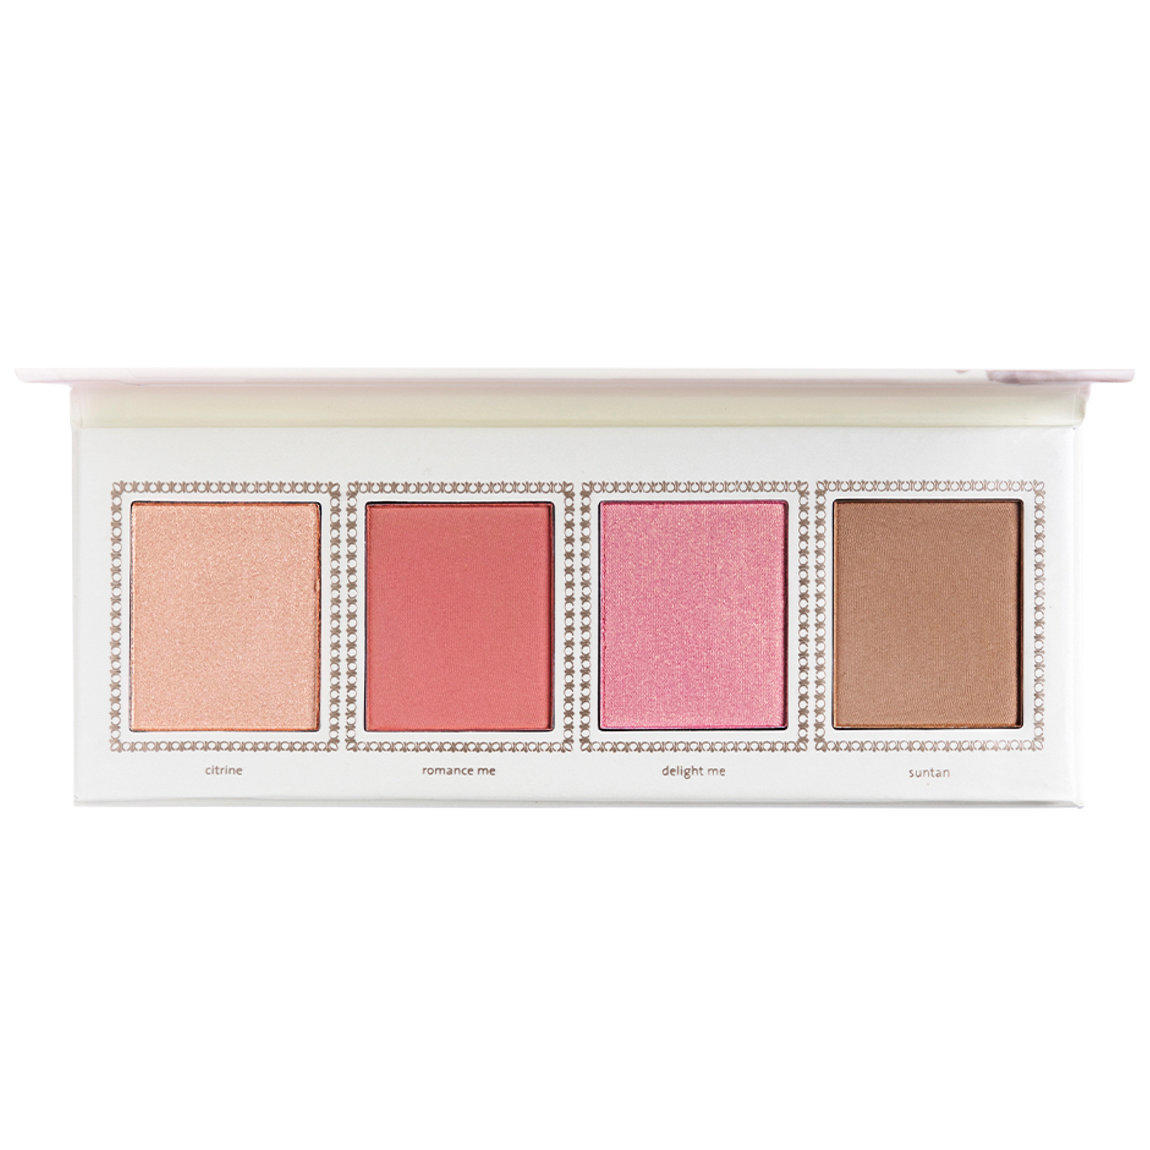 Jouer Cosmetics Champagne & Macarons Face Palette Sweet Cheeks